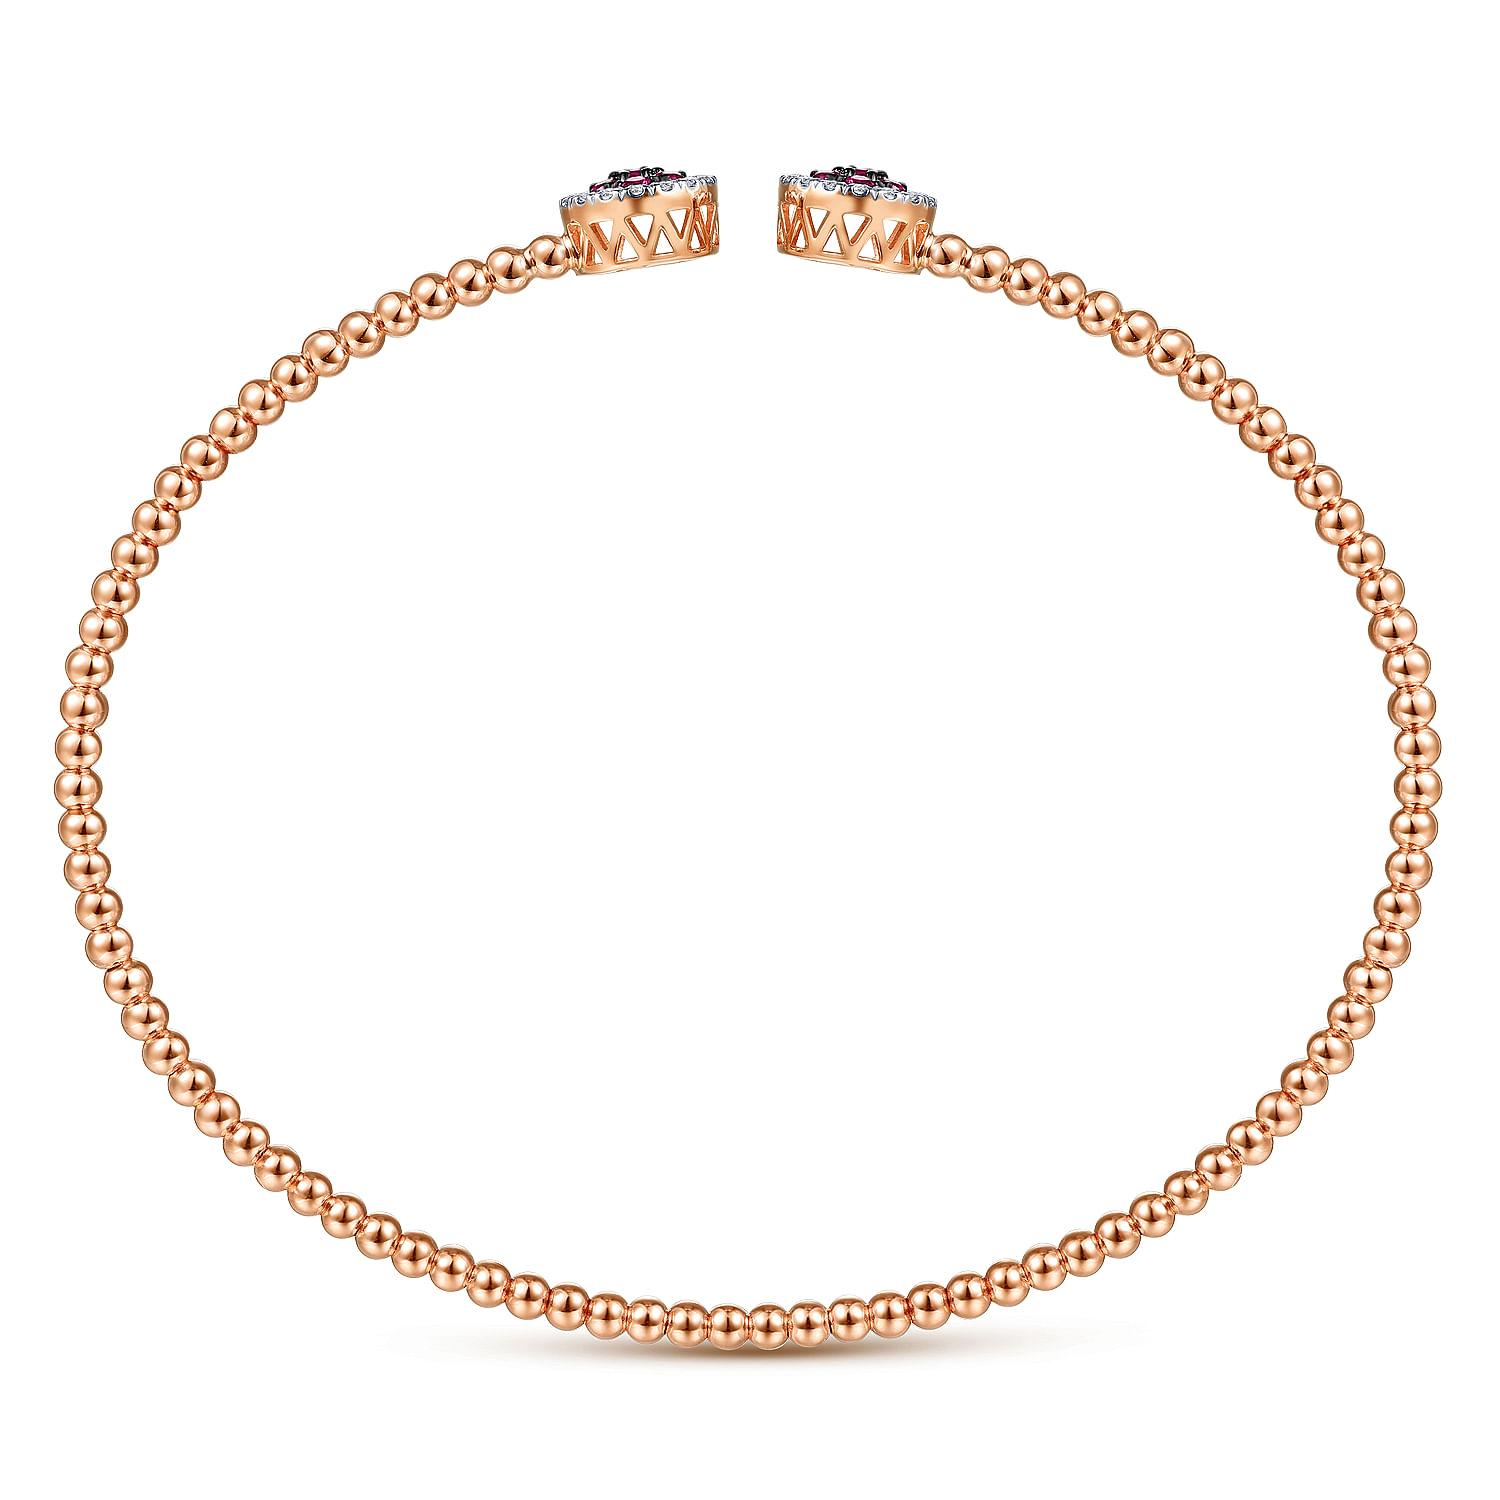 14K Rose Gold Bujukan Bead Cuff Bracelet with Ruby and Diamond Halo Caps